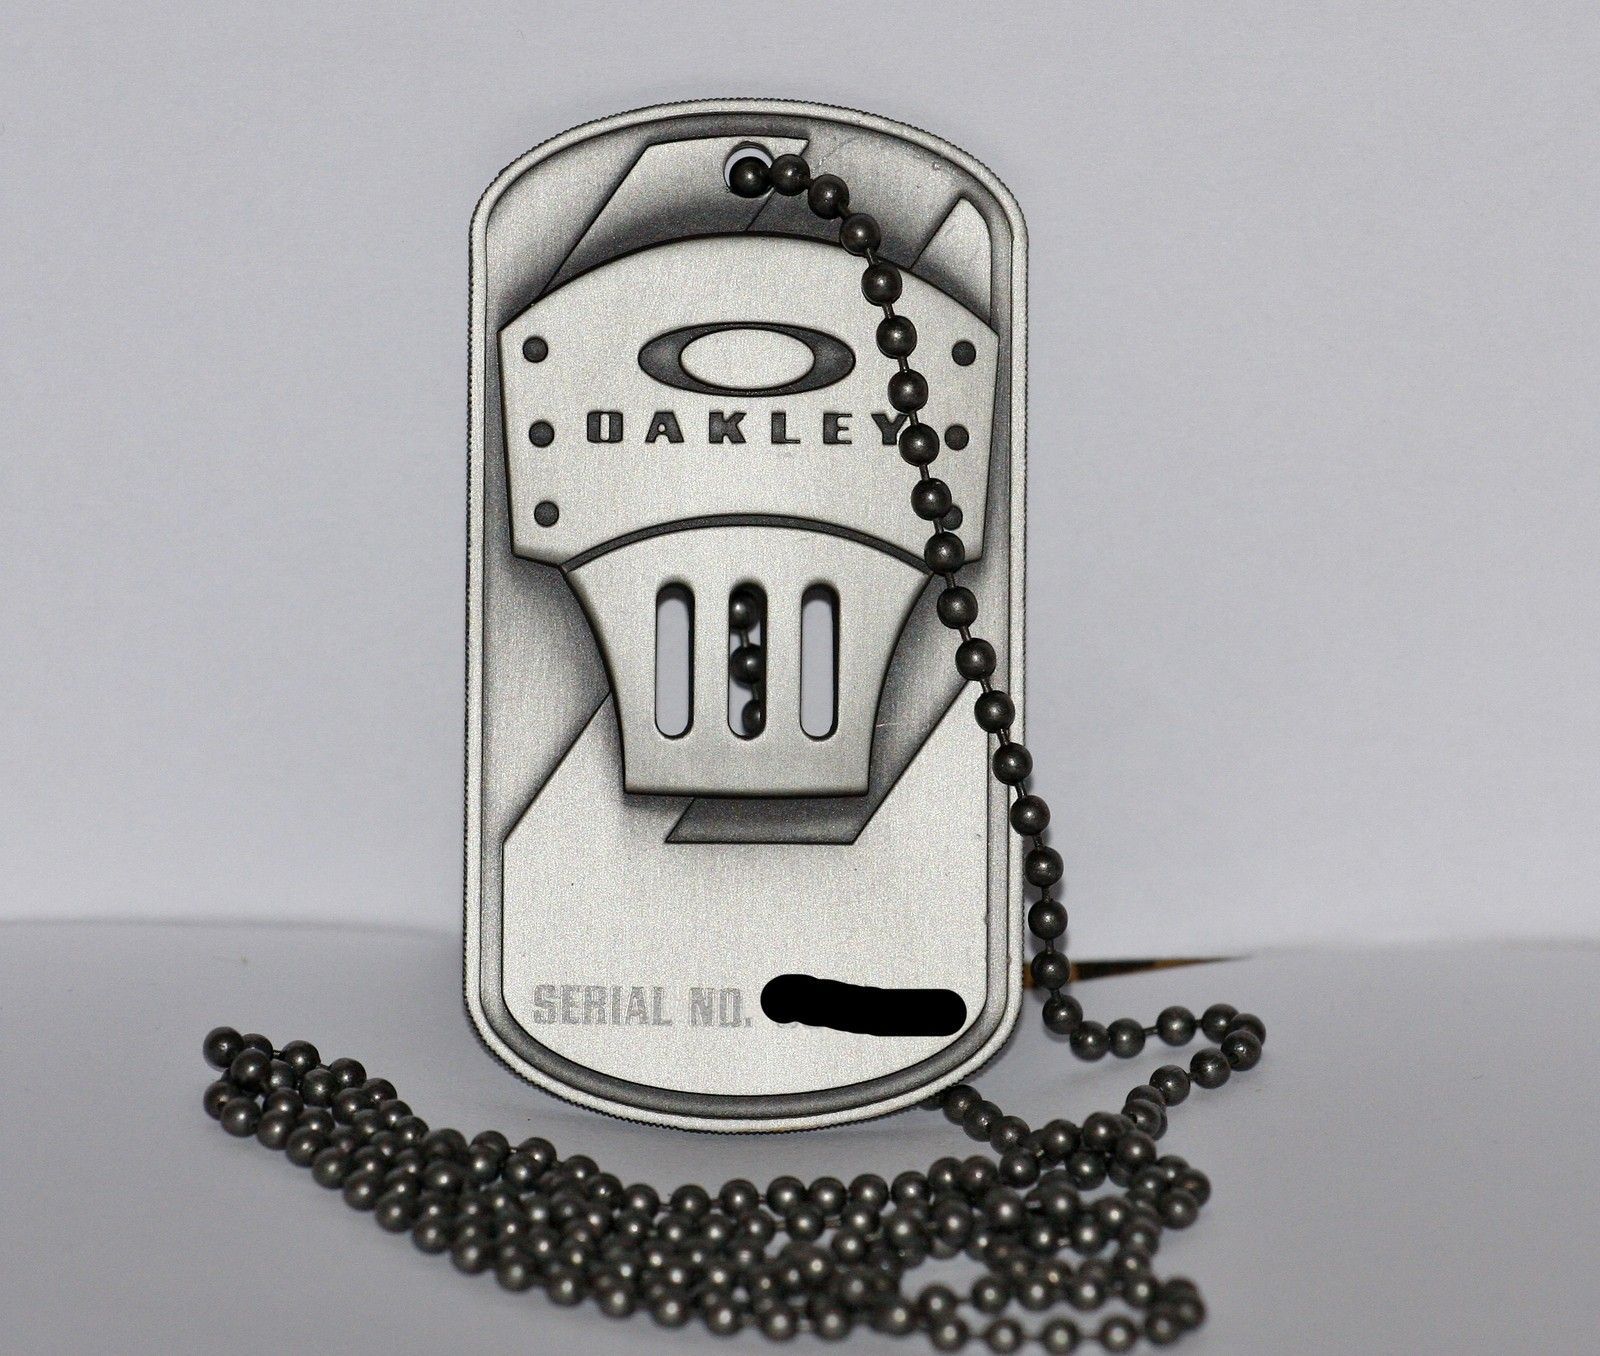 Employee Dog Tag 001 blacked out.jpg